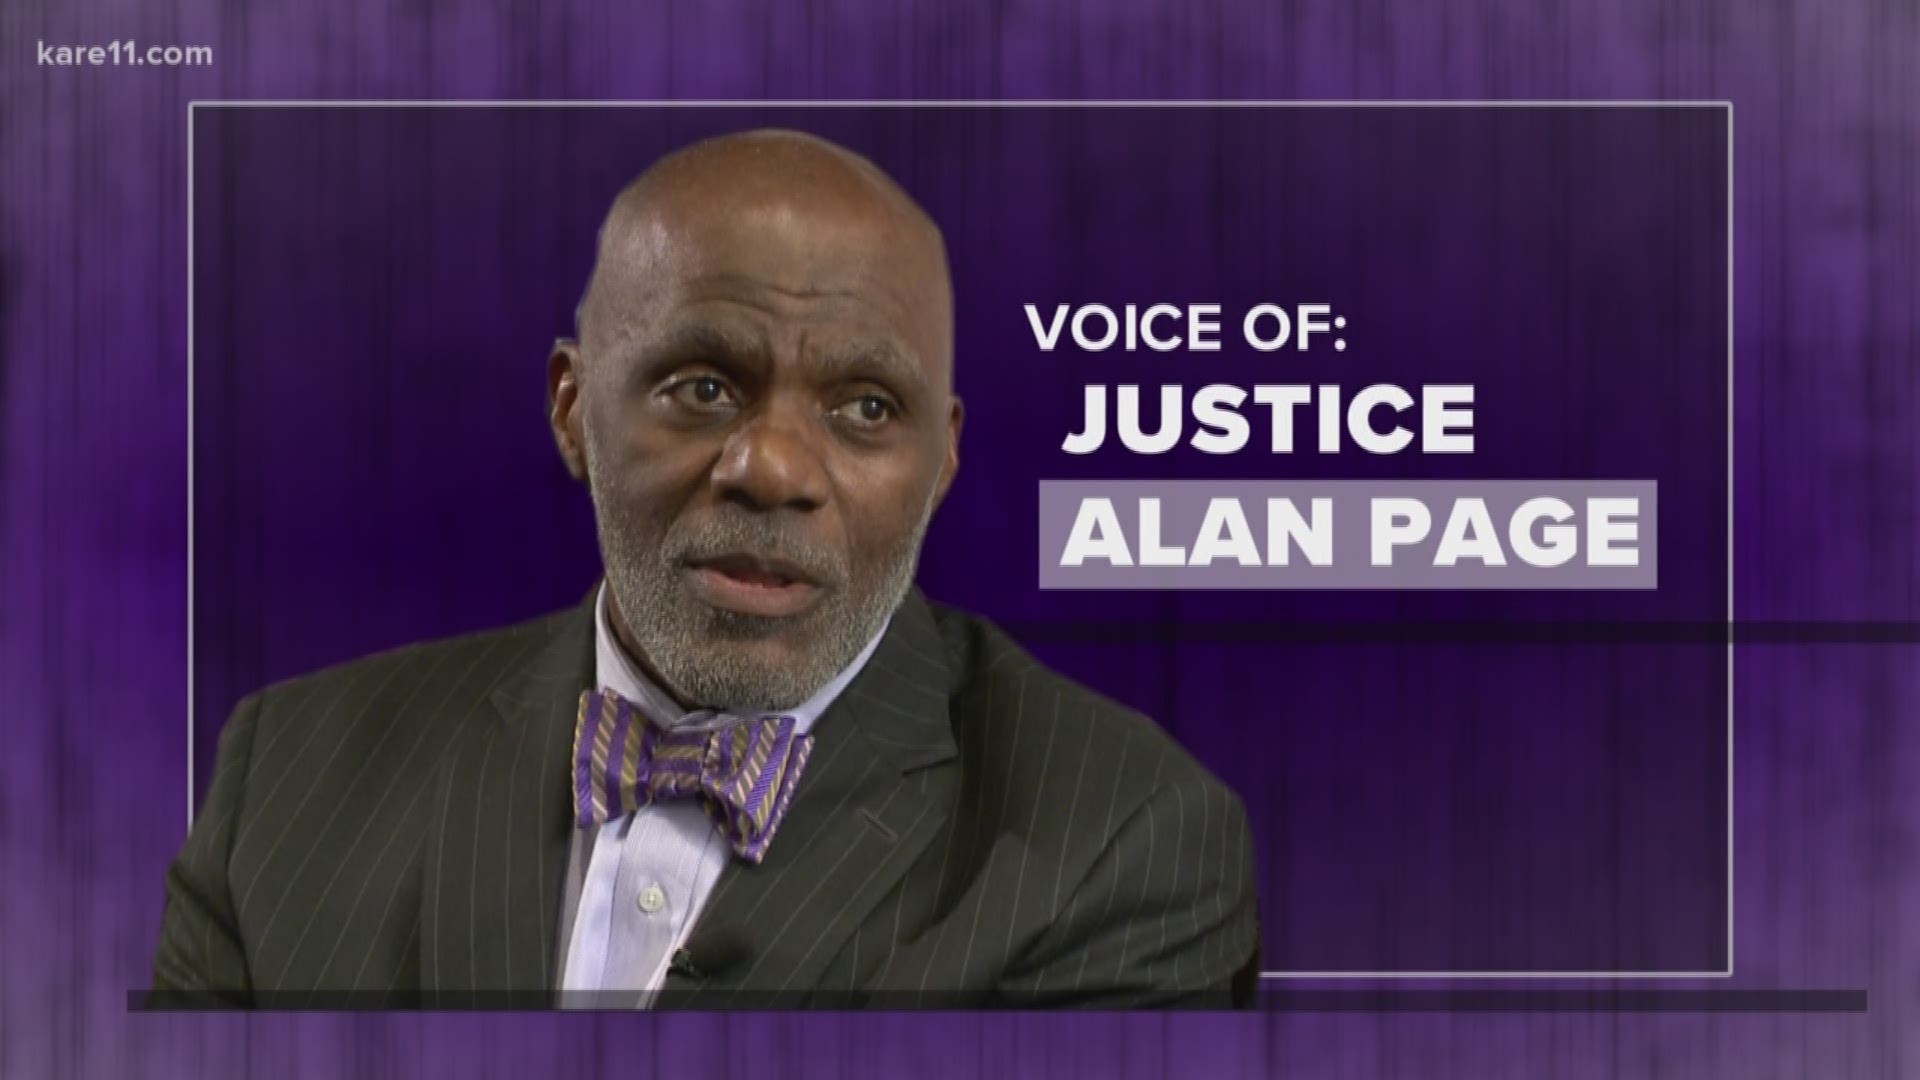 Page got his law degree while playing for the Vikings, and in 1992, he won a seat on the Minnesota Supreme Court.